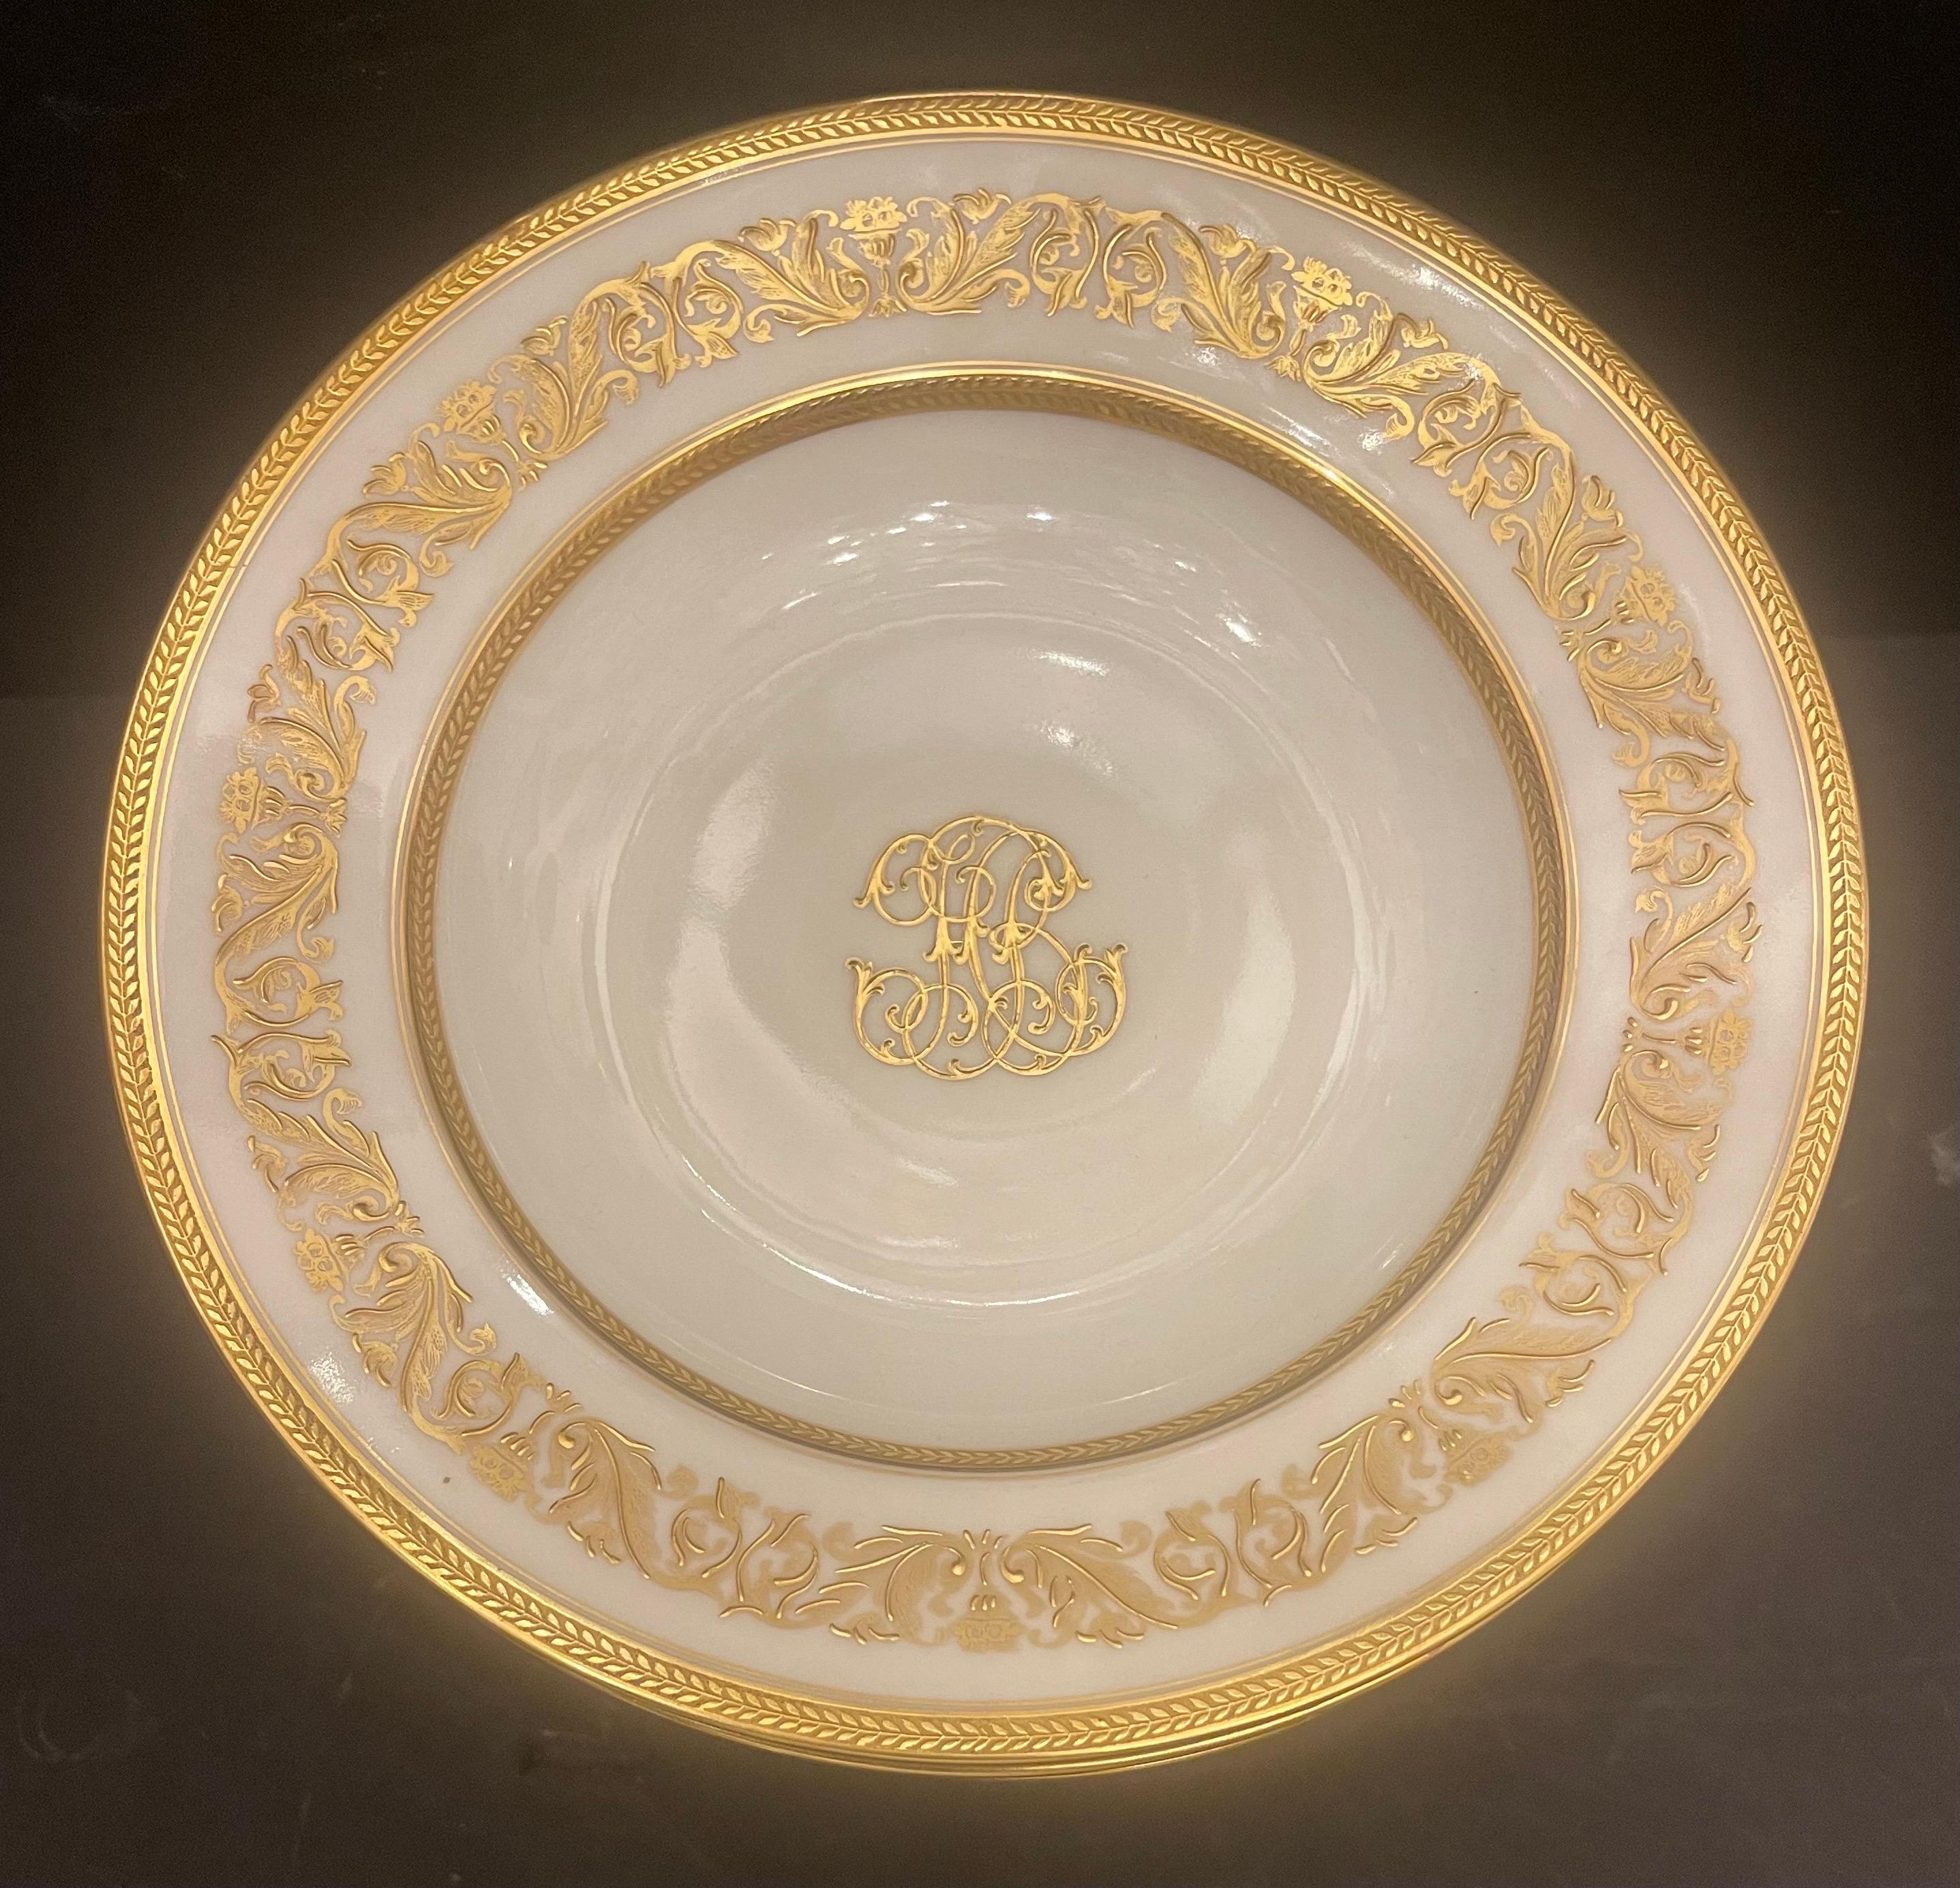 A Very Regal Charles Ahrenfeldt Limoges For Bailey, Banks & Biddle Set Of 12 Raised Gold Encrusted Soup Bowls Plates 